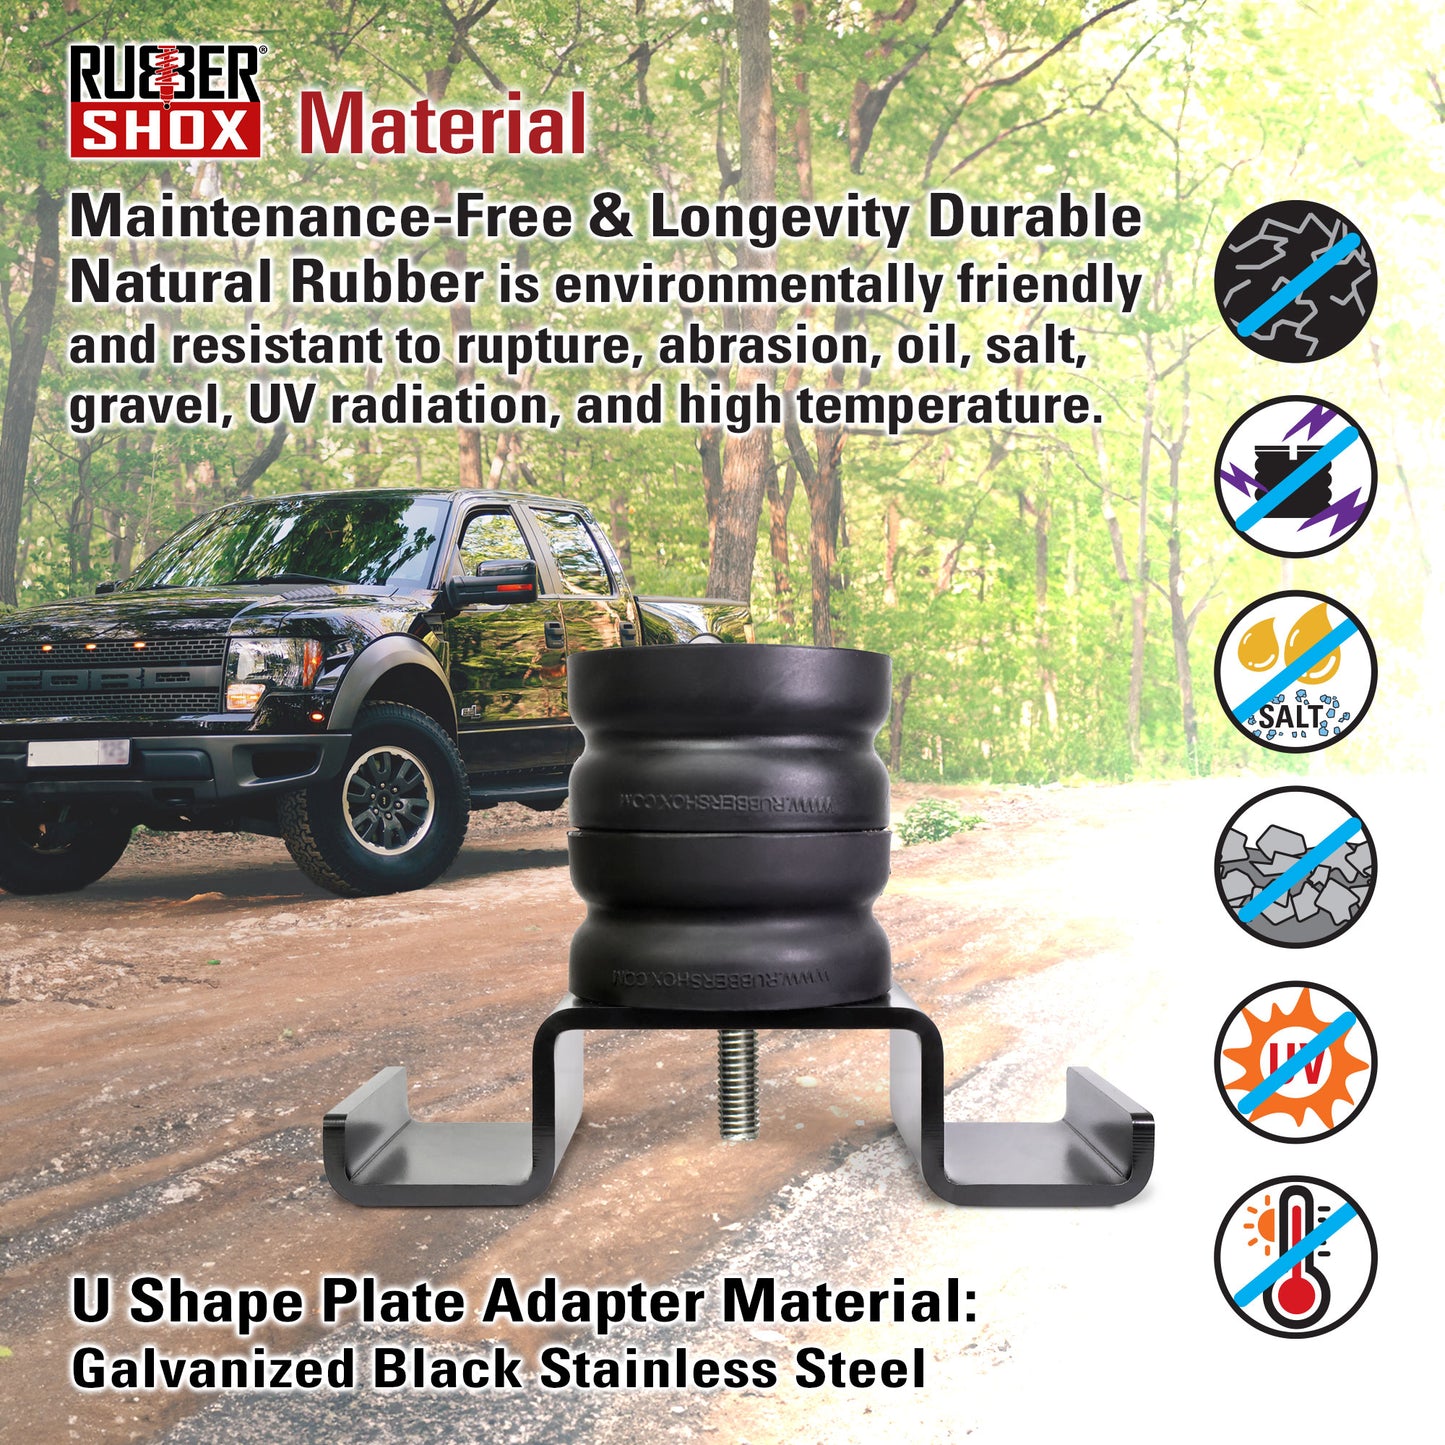 Modular Universal Off Road Rubber Bump Stops - MUB12F-OFFROAD  for Toyota Tacoma, Nissan Frontier, Chevrolet Colorado, Ford Ranger, GMC Canyon